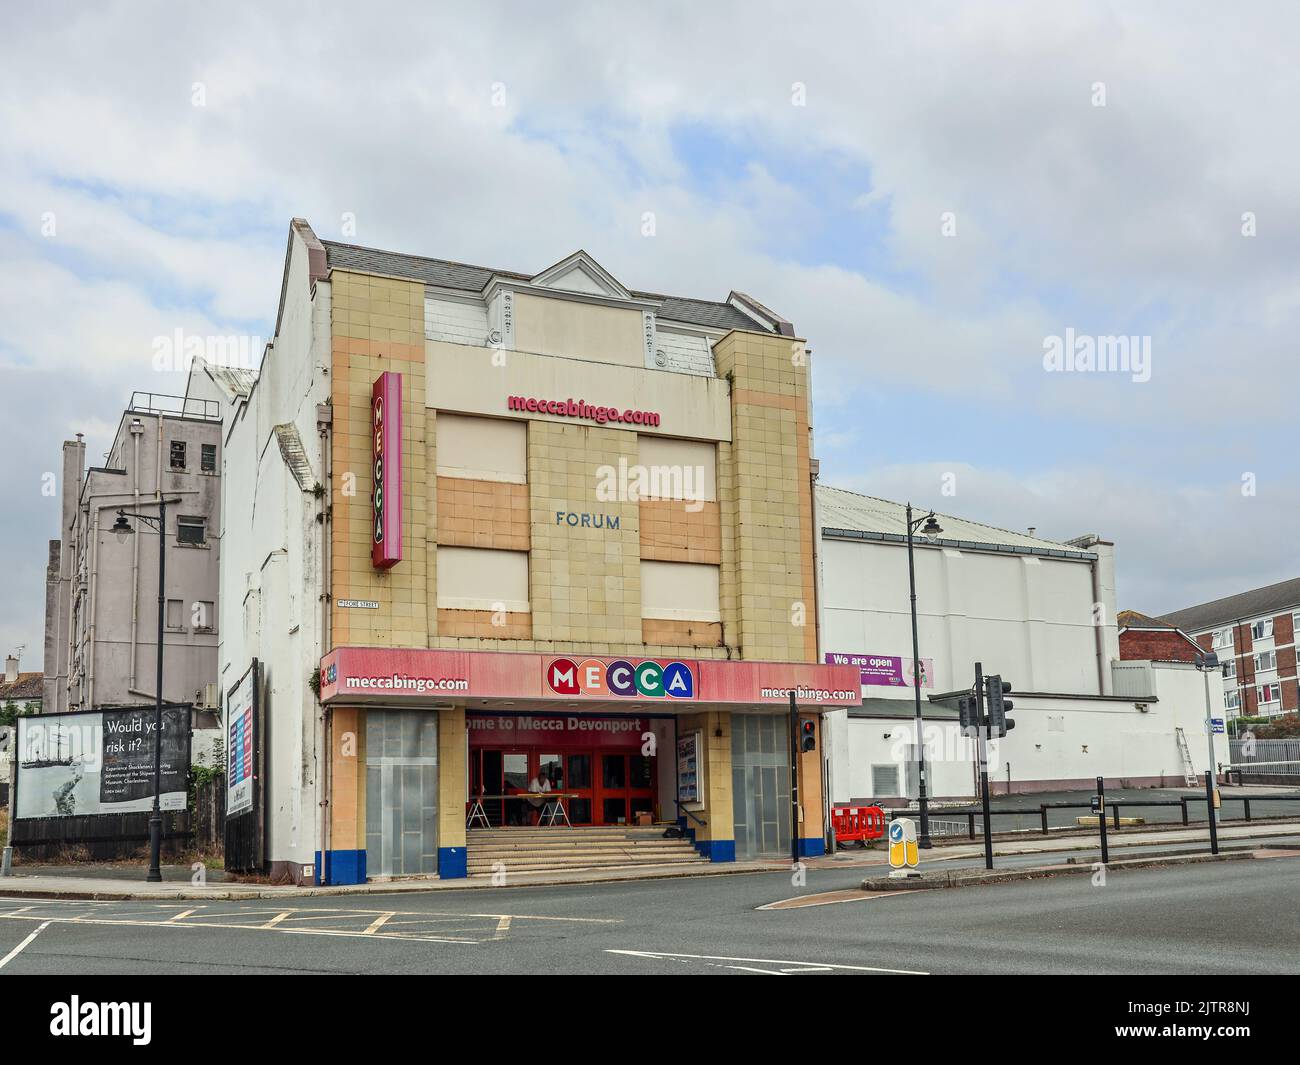 The empty Mecca Bingo club in Fore Street Devonport, recently closed, sad after a life of entertainment and social life. The building was formerly the Stock Photo